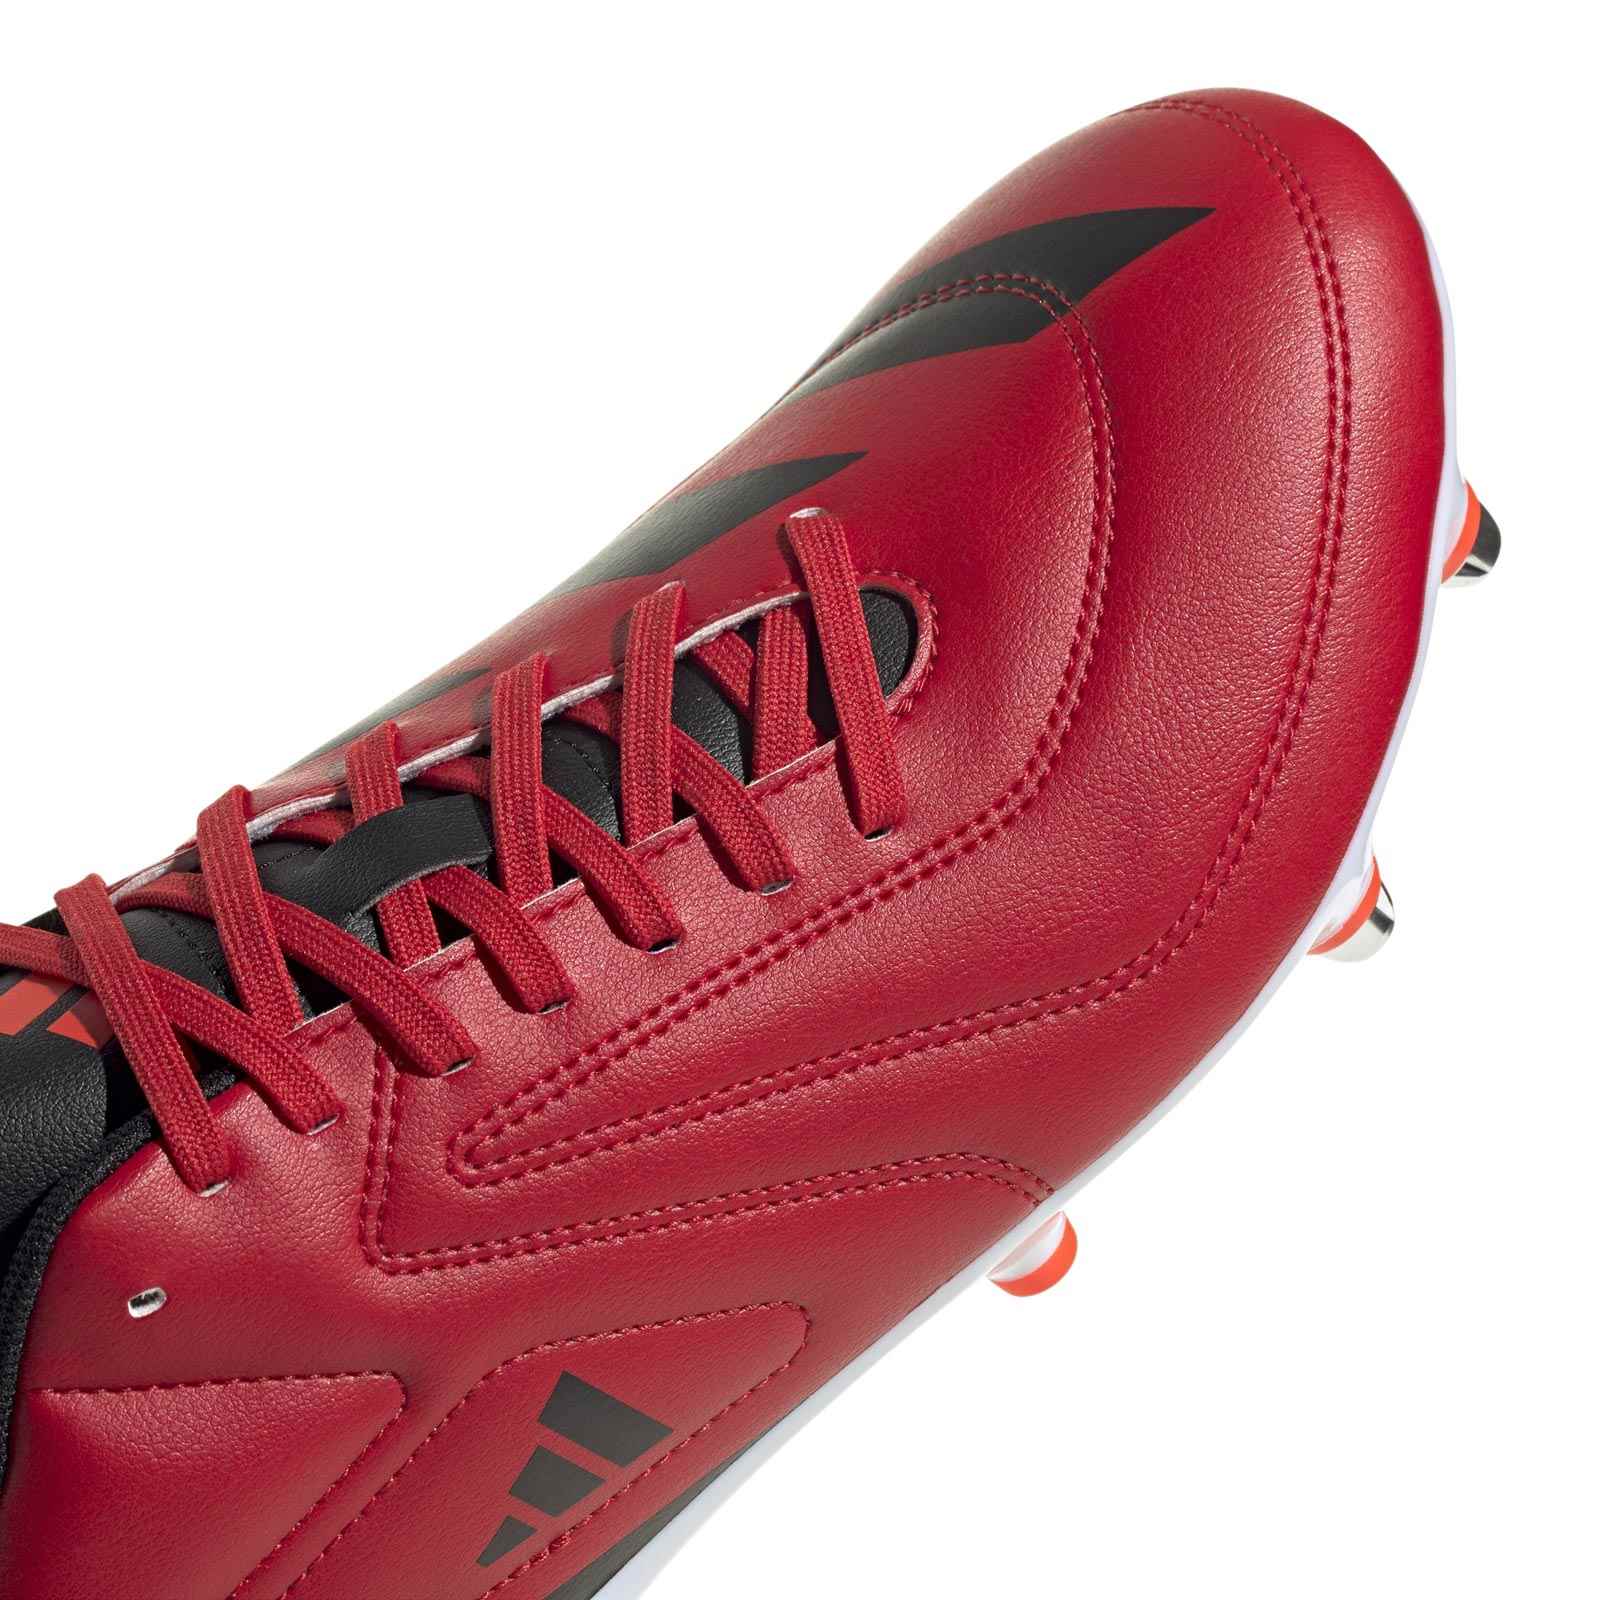 adidas RS15 Pro Soft Ground Rugby Boots